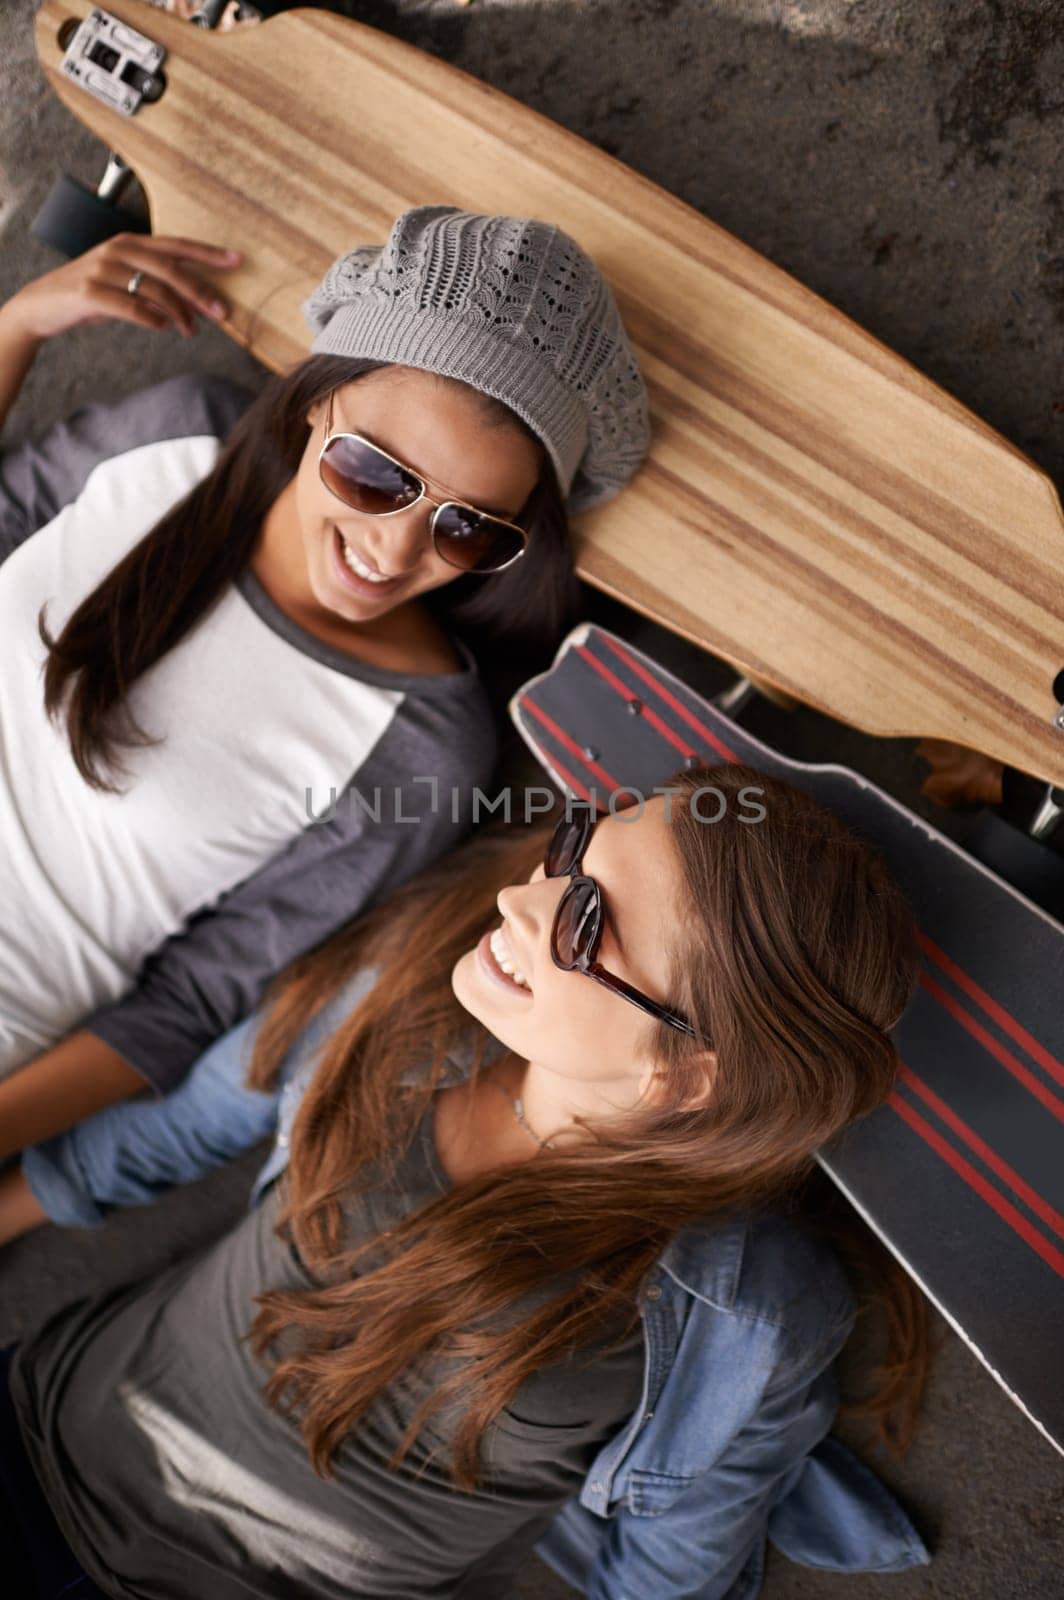 Happy, friends and above of women with skateboard for exercise, training and competition in city. Skate park, fashion and young people in trendy, casual and street style for sports, hobby and fitness.